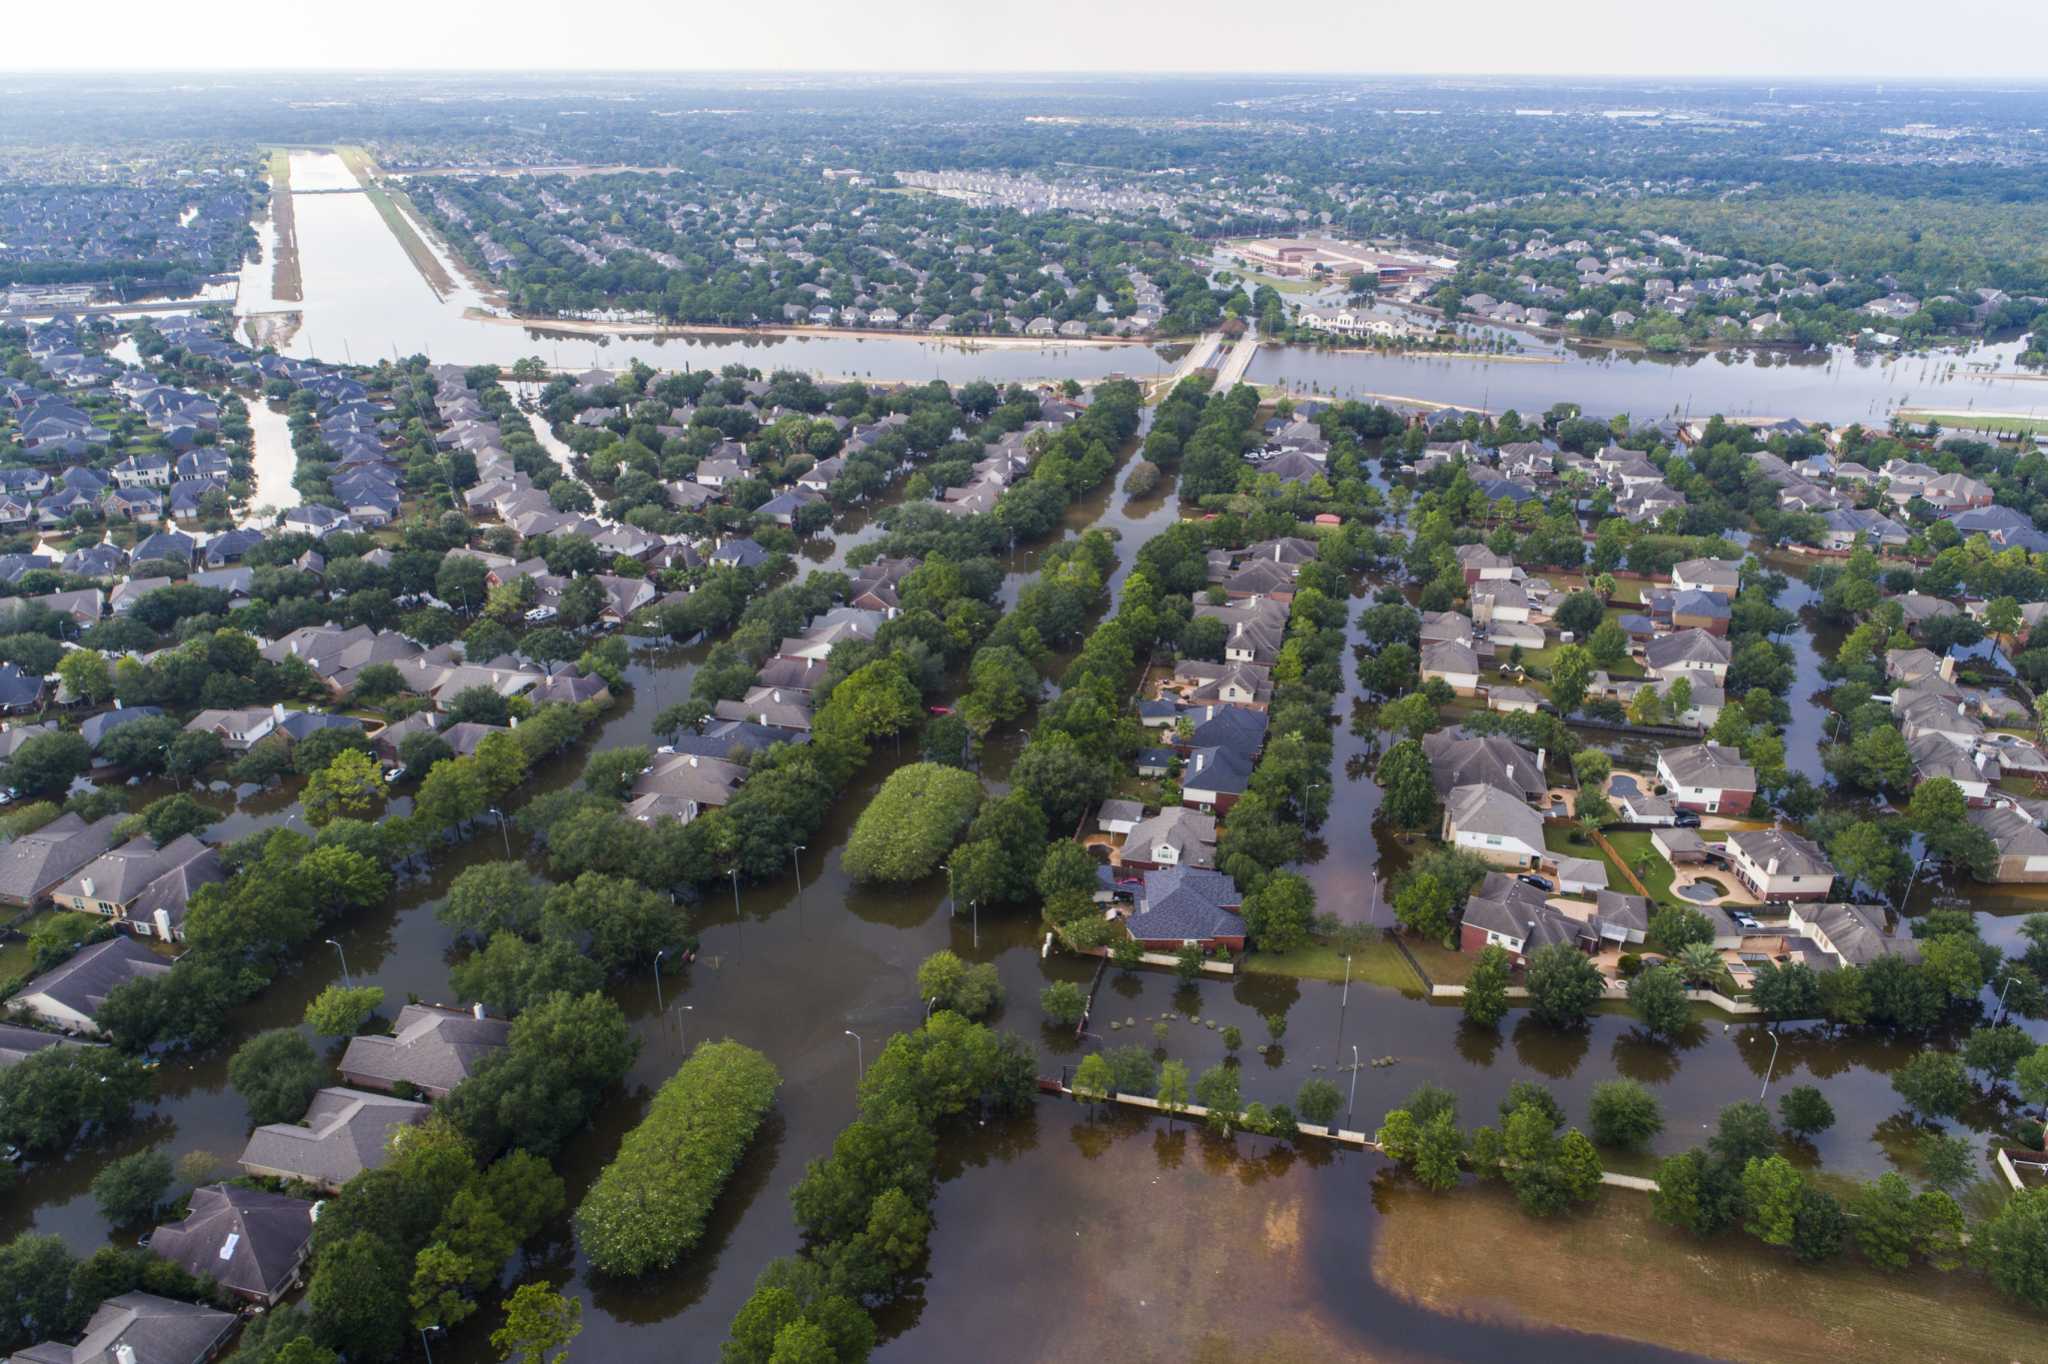 Houston asks west side residents to limit water use until sewage plants fixed ...2048 x 1364